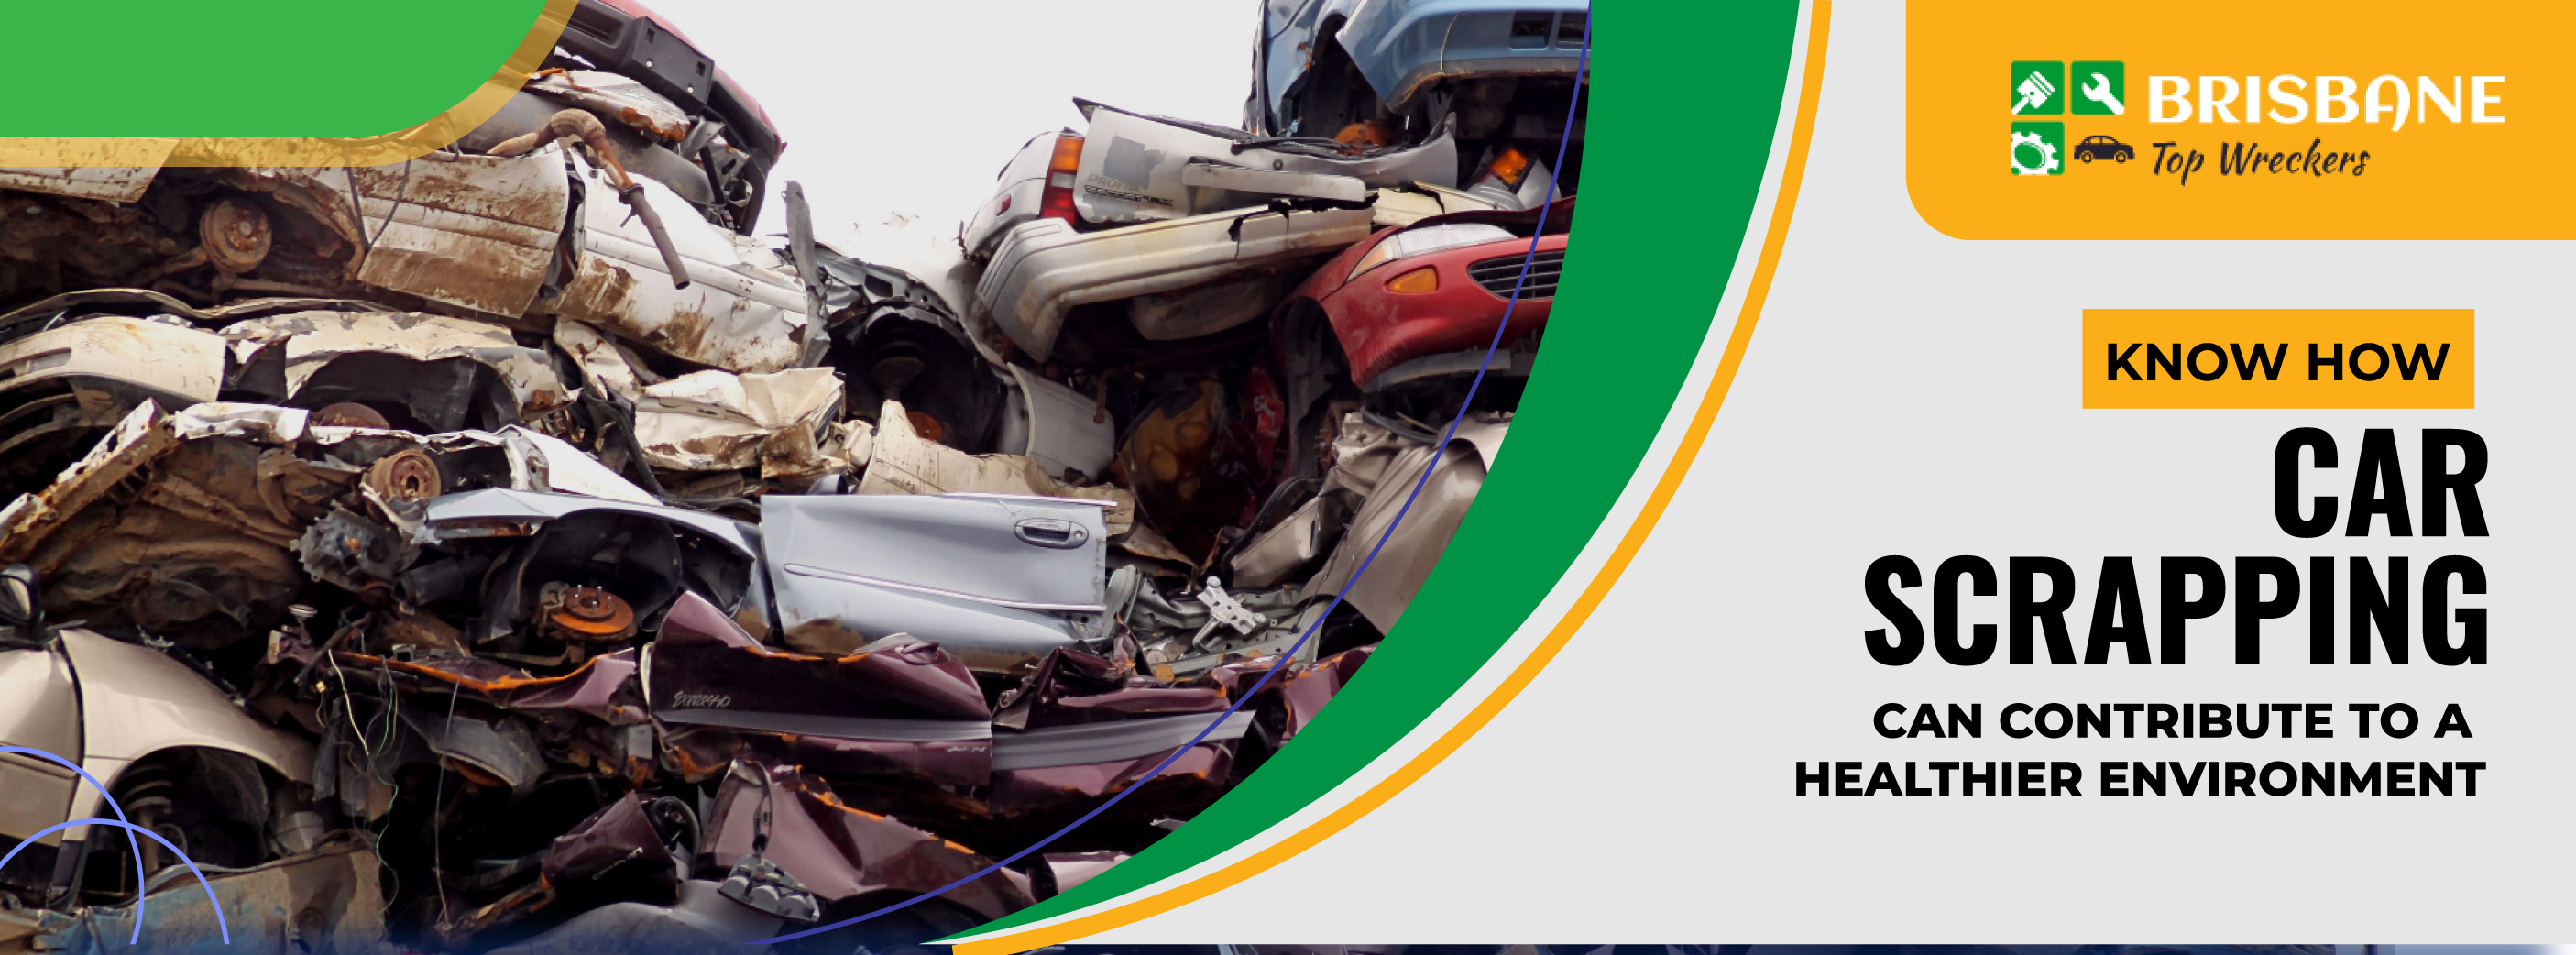 Know How Car Scrapping Can Contribute To A Healthier Environment